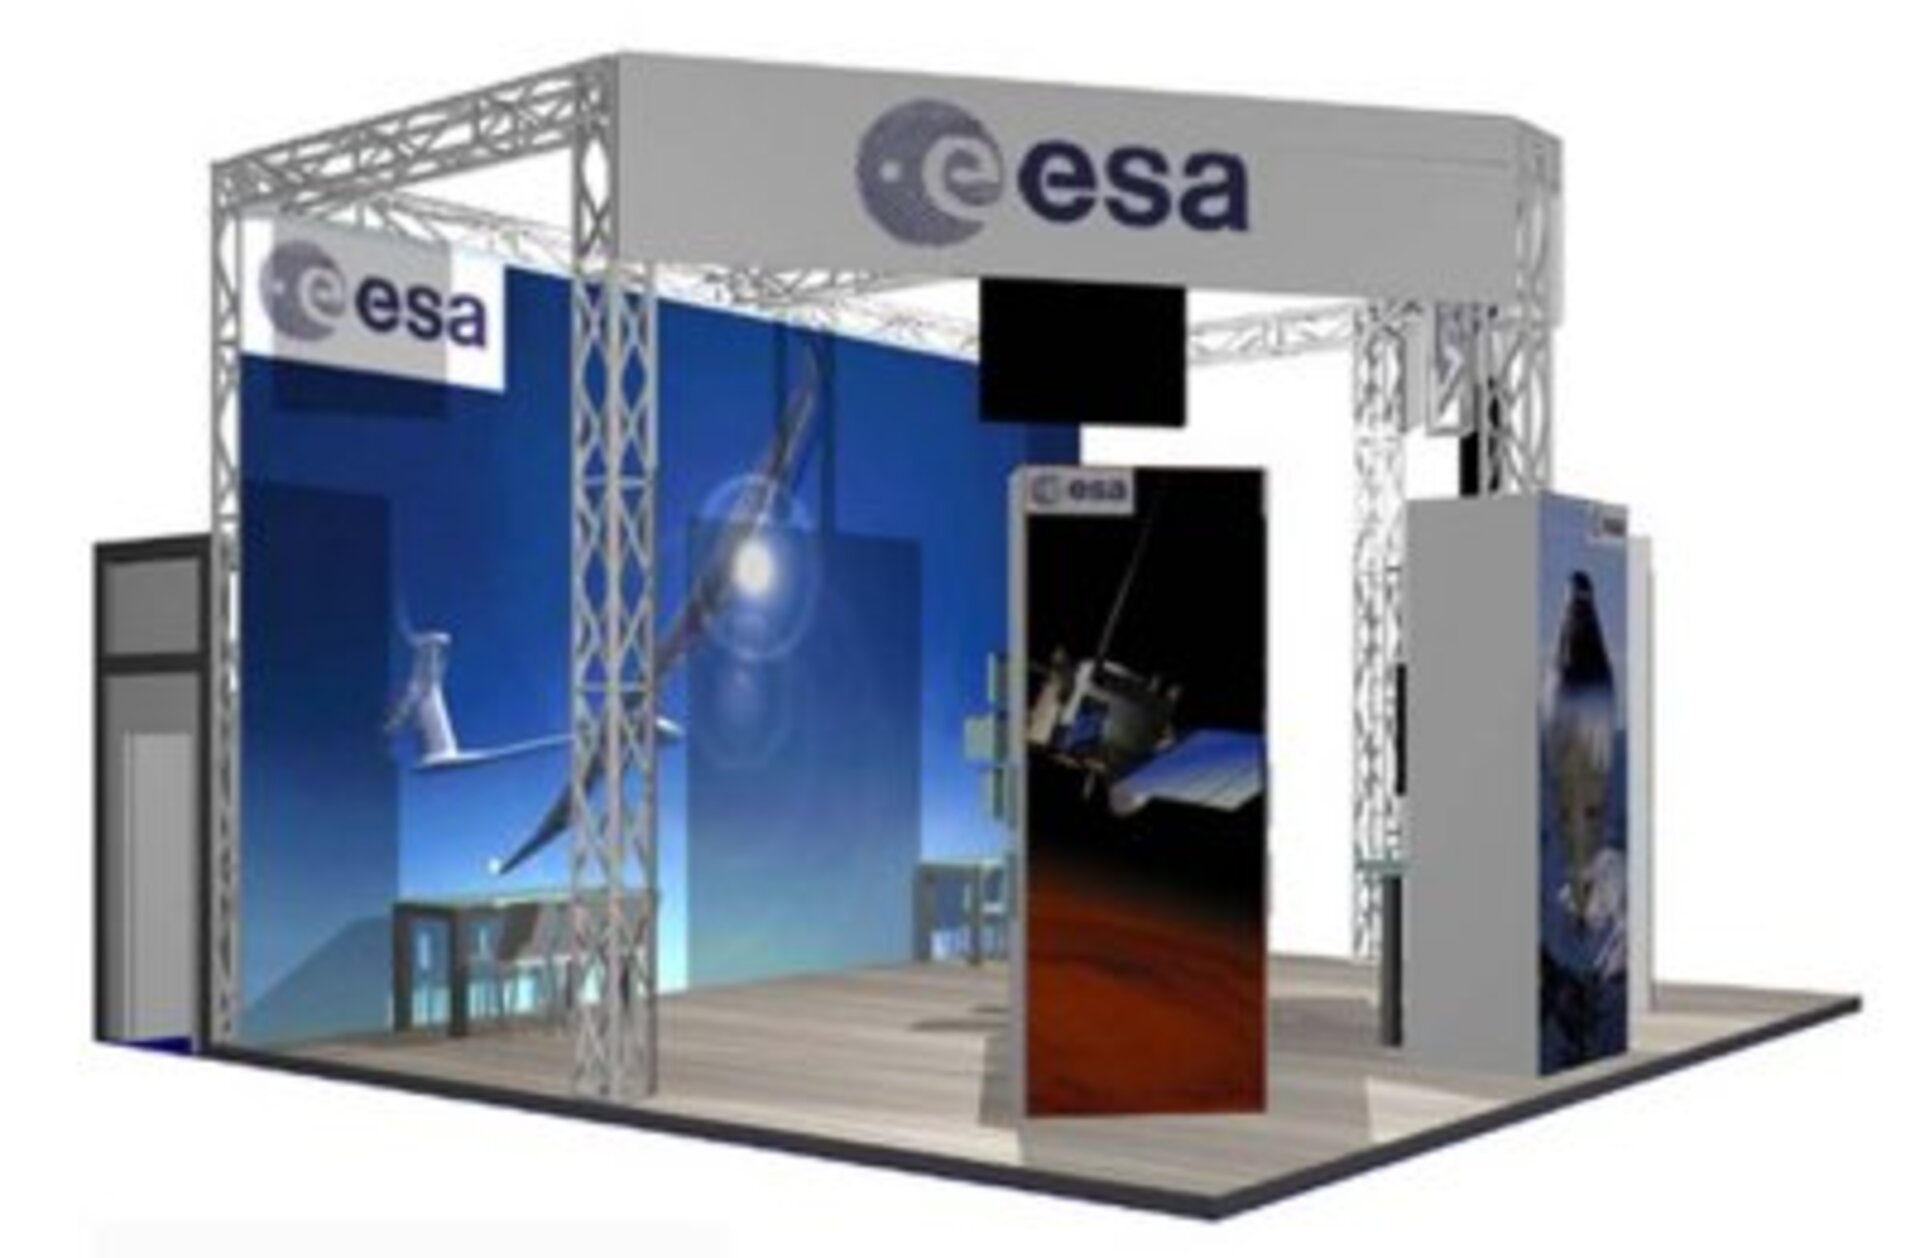 ESA stand at SatExpo 2004